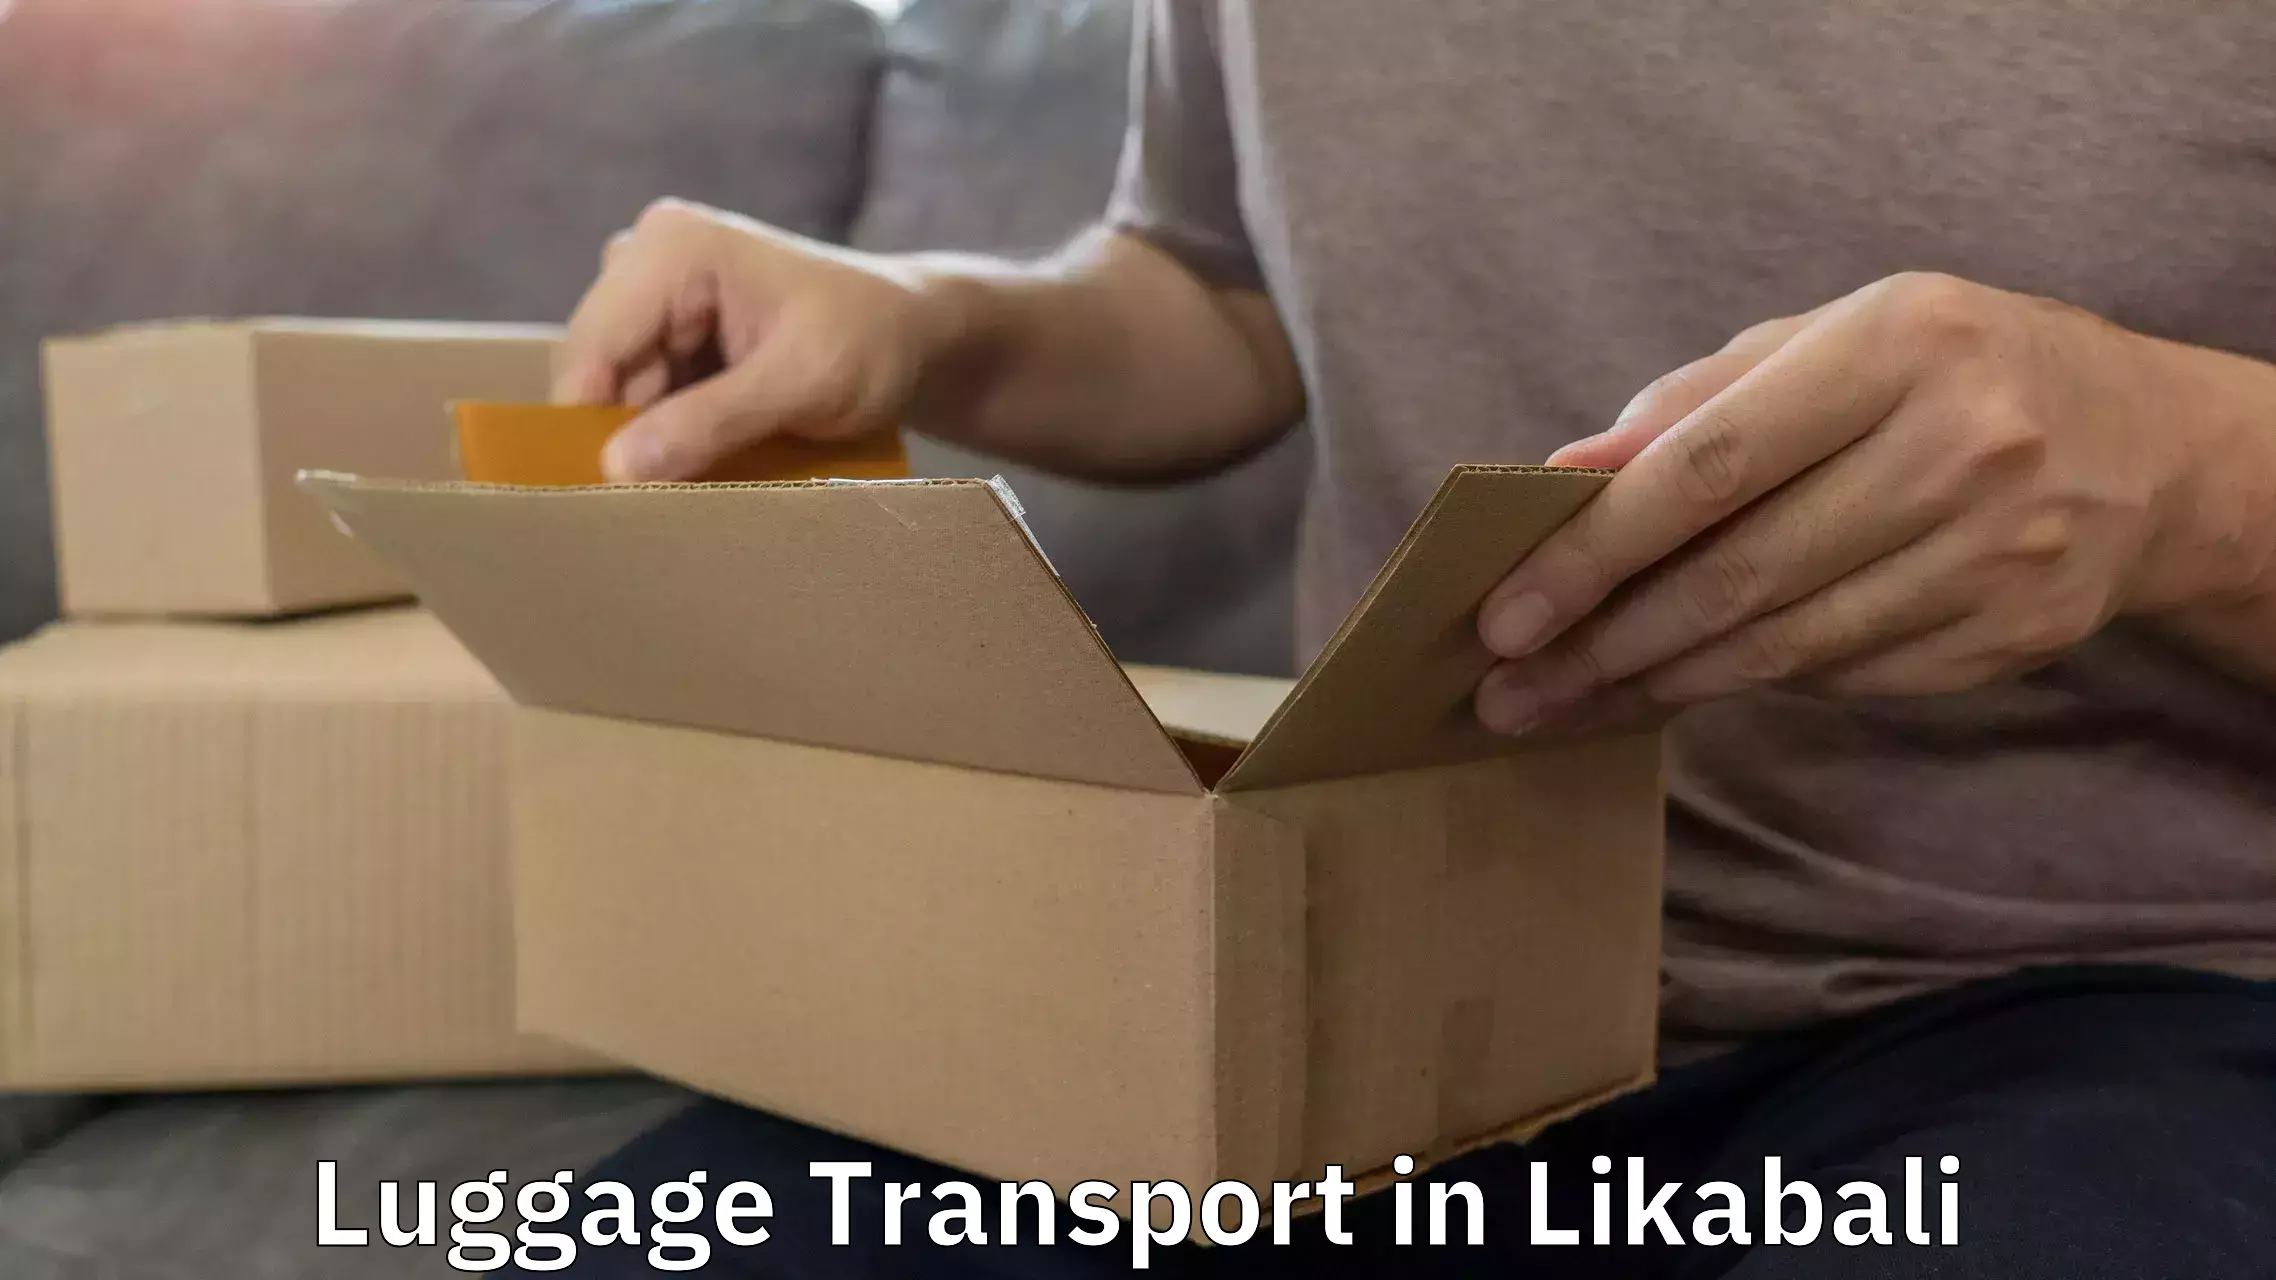 Luggage transport service in Likabali